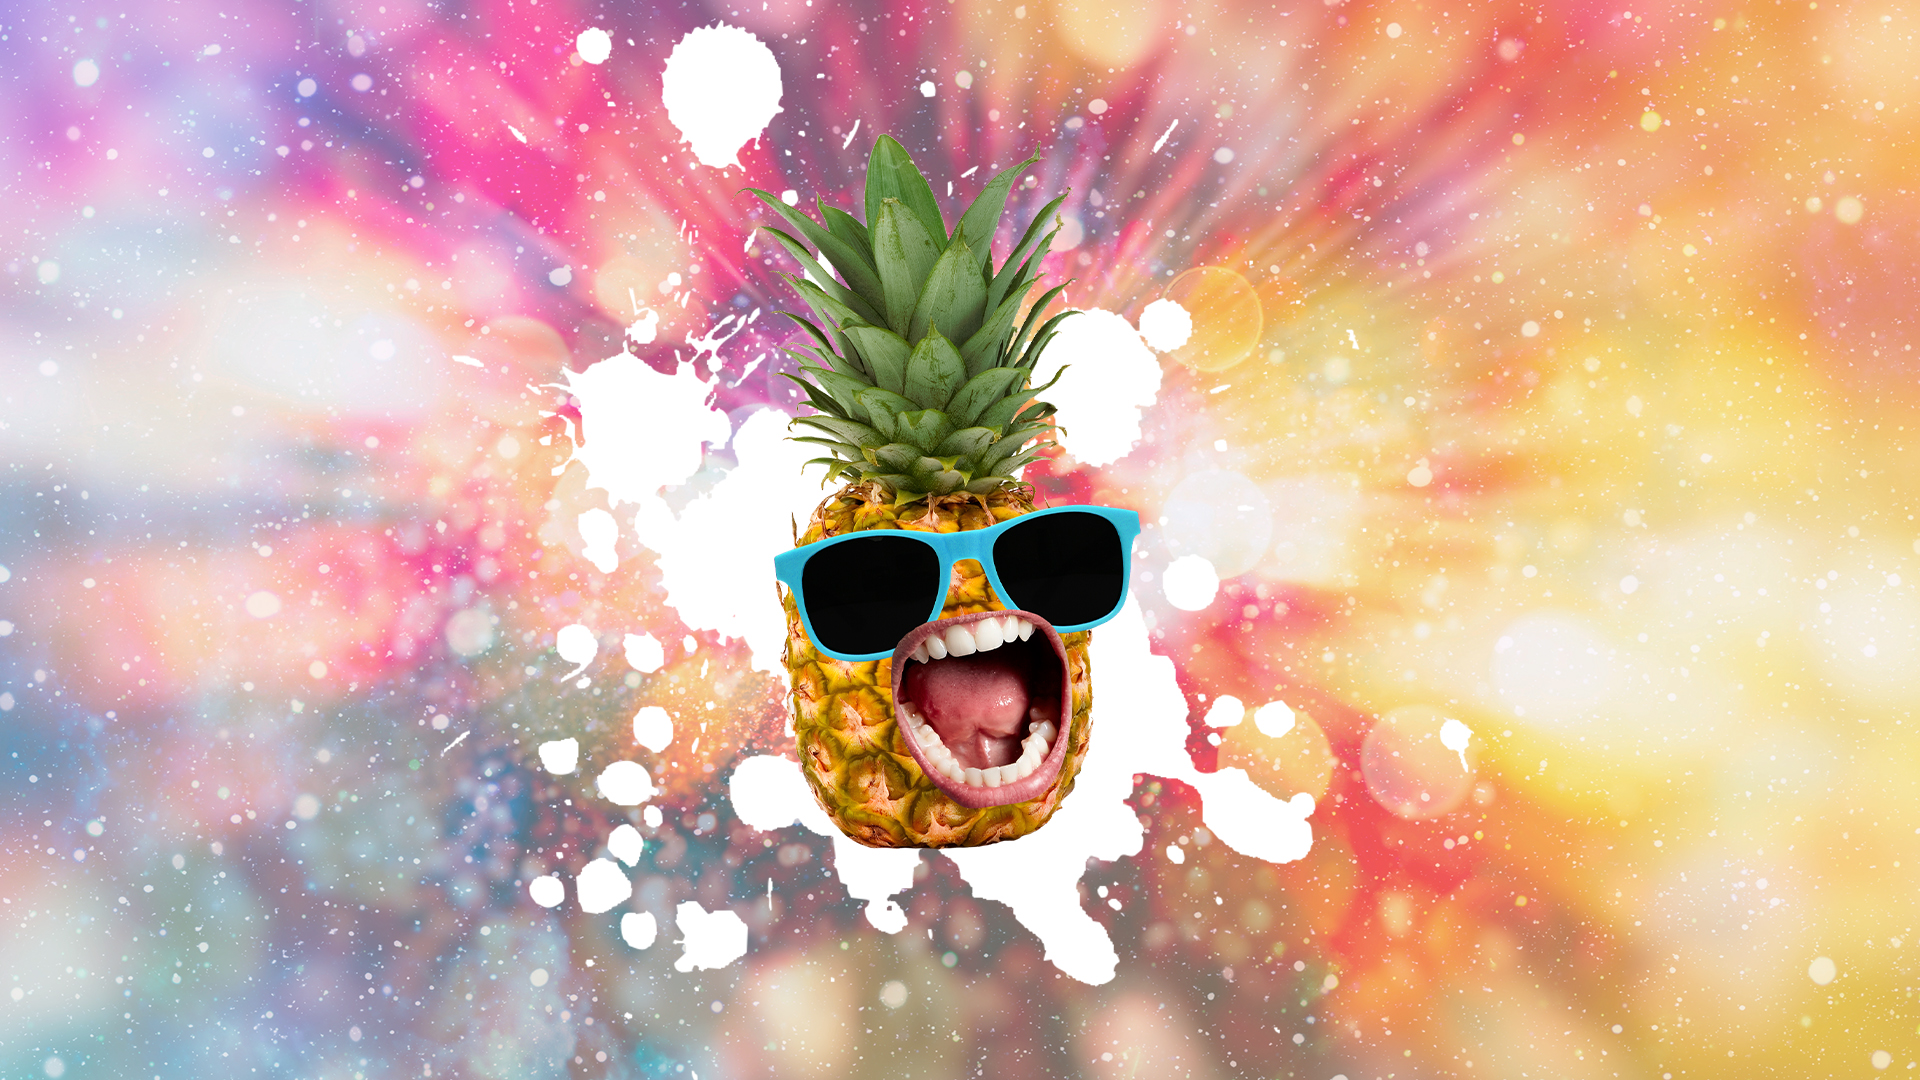 A laughing pineapple wearing sunglasses